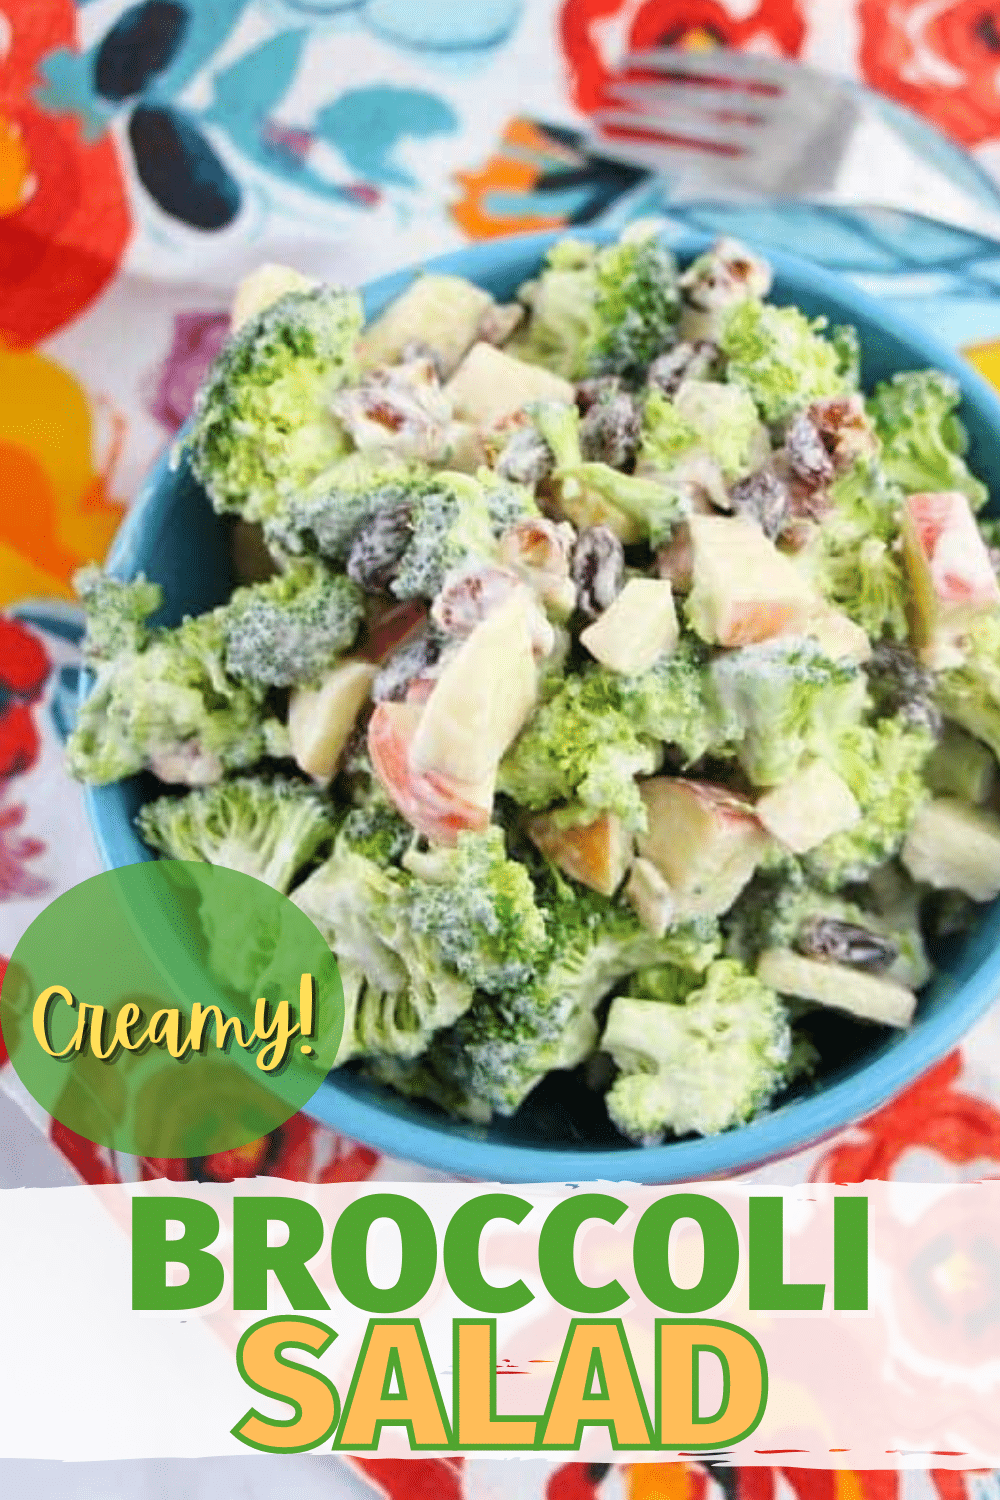 Broccoli Salad in a blue bowl on a flower cloth with title text reading Creamy Broccoli Salad